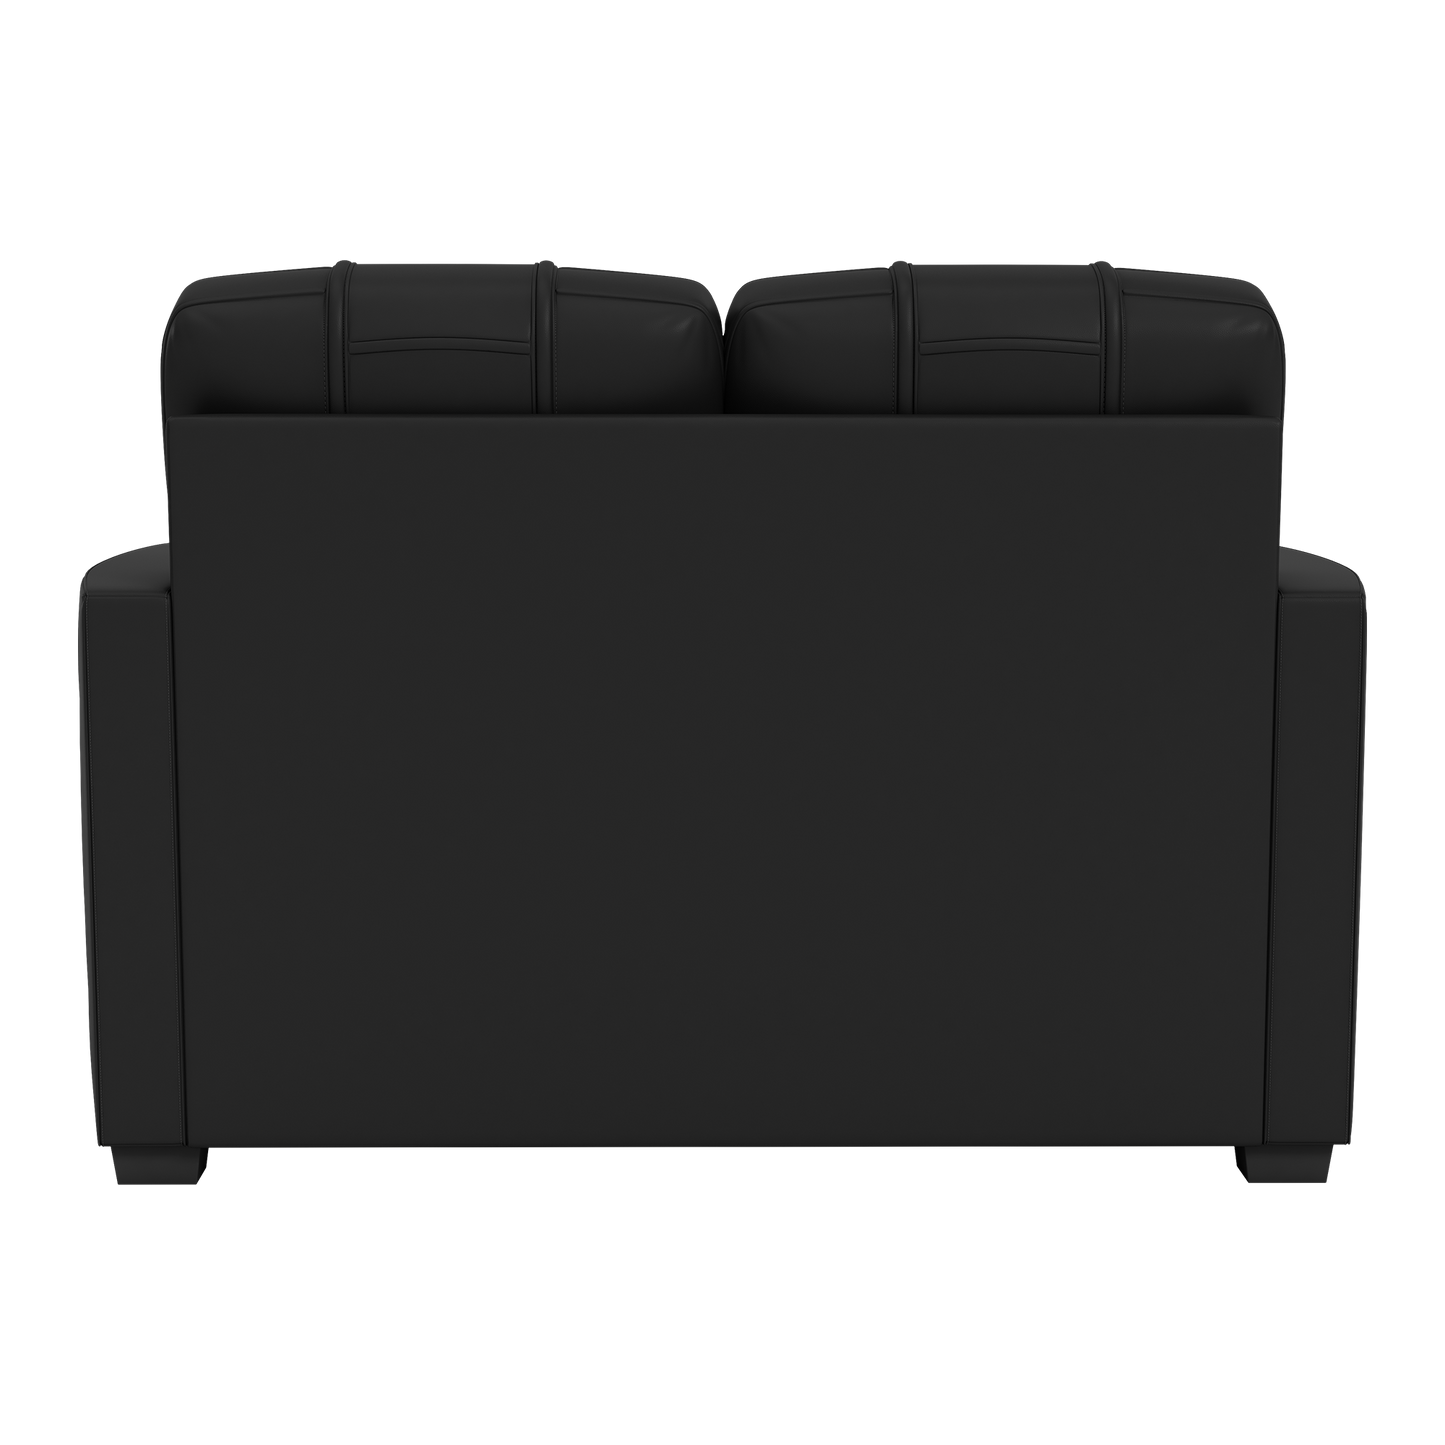 Stationary Loveseat with American East Esports Conference Logo